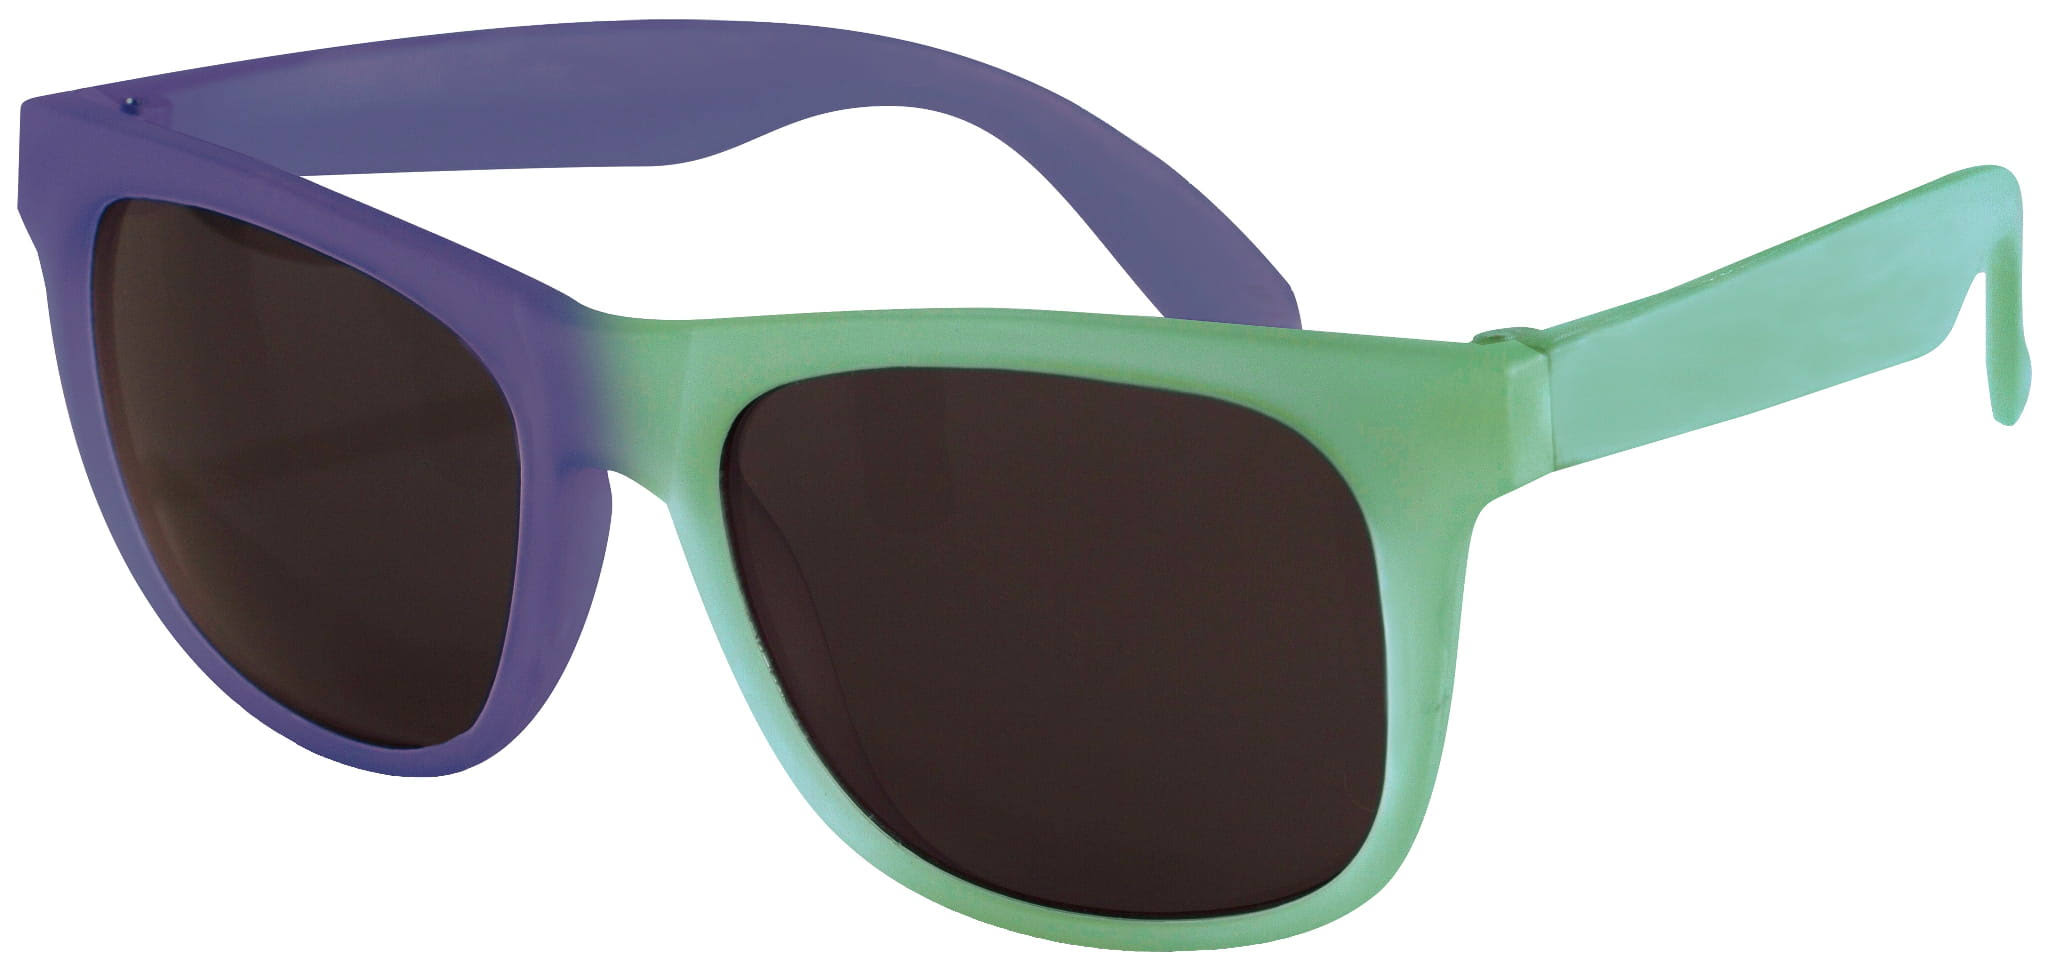 Real Shades Switch Sunglasses with Color Changing Frames | Green/Blue